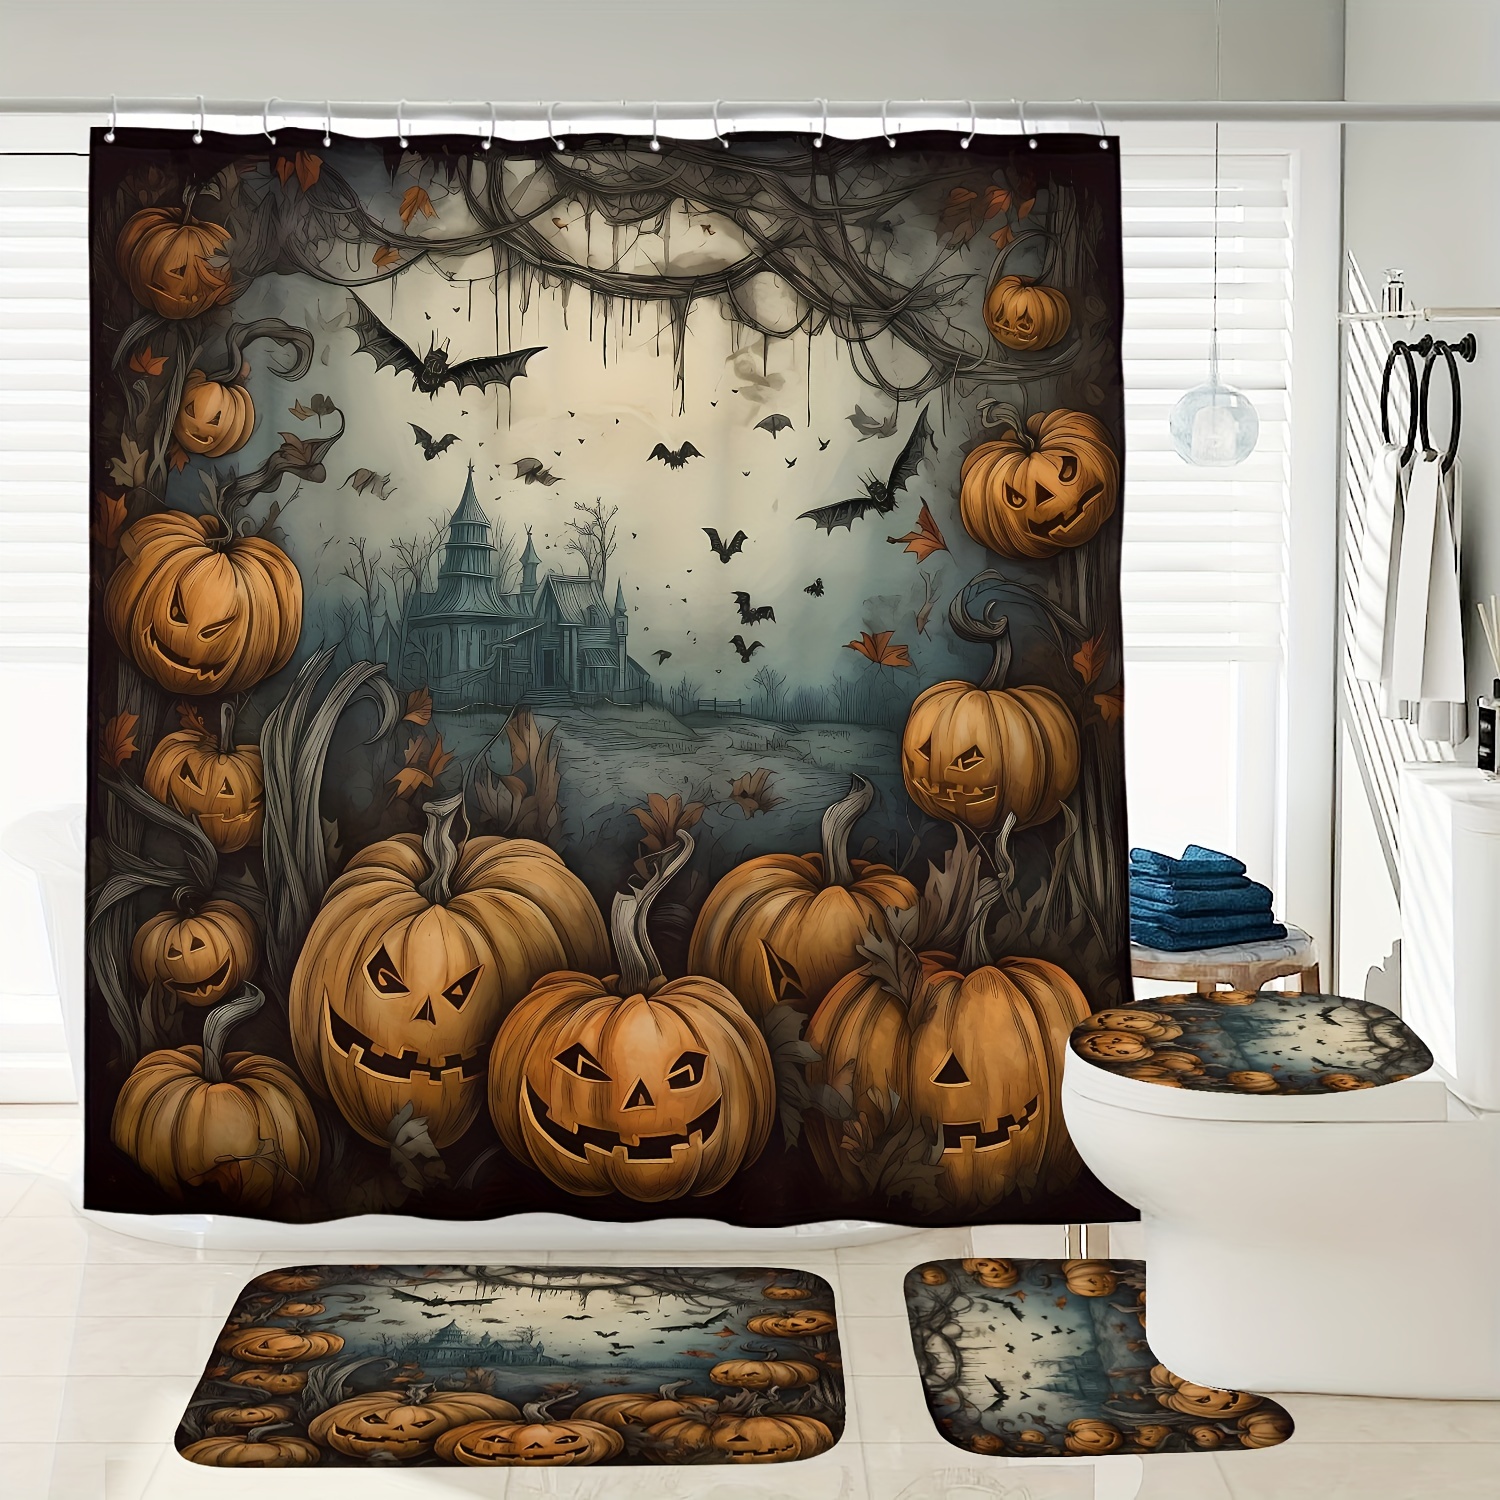 

Halloween Shower Curtain Set With Pumpkin Bat Motif - Includes Waterproof Curtain, Non-slip Bath Mat, Toilet Lid Cover & 12 Hooks - Cordless Woven Polyester Home Bathroom Decor With Forest Theme